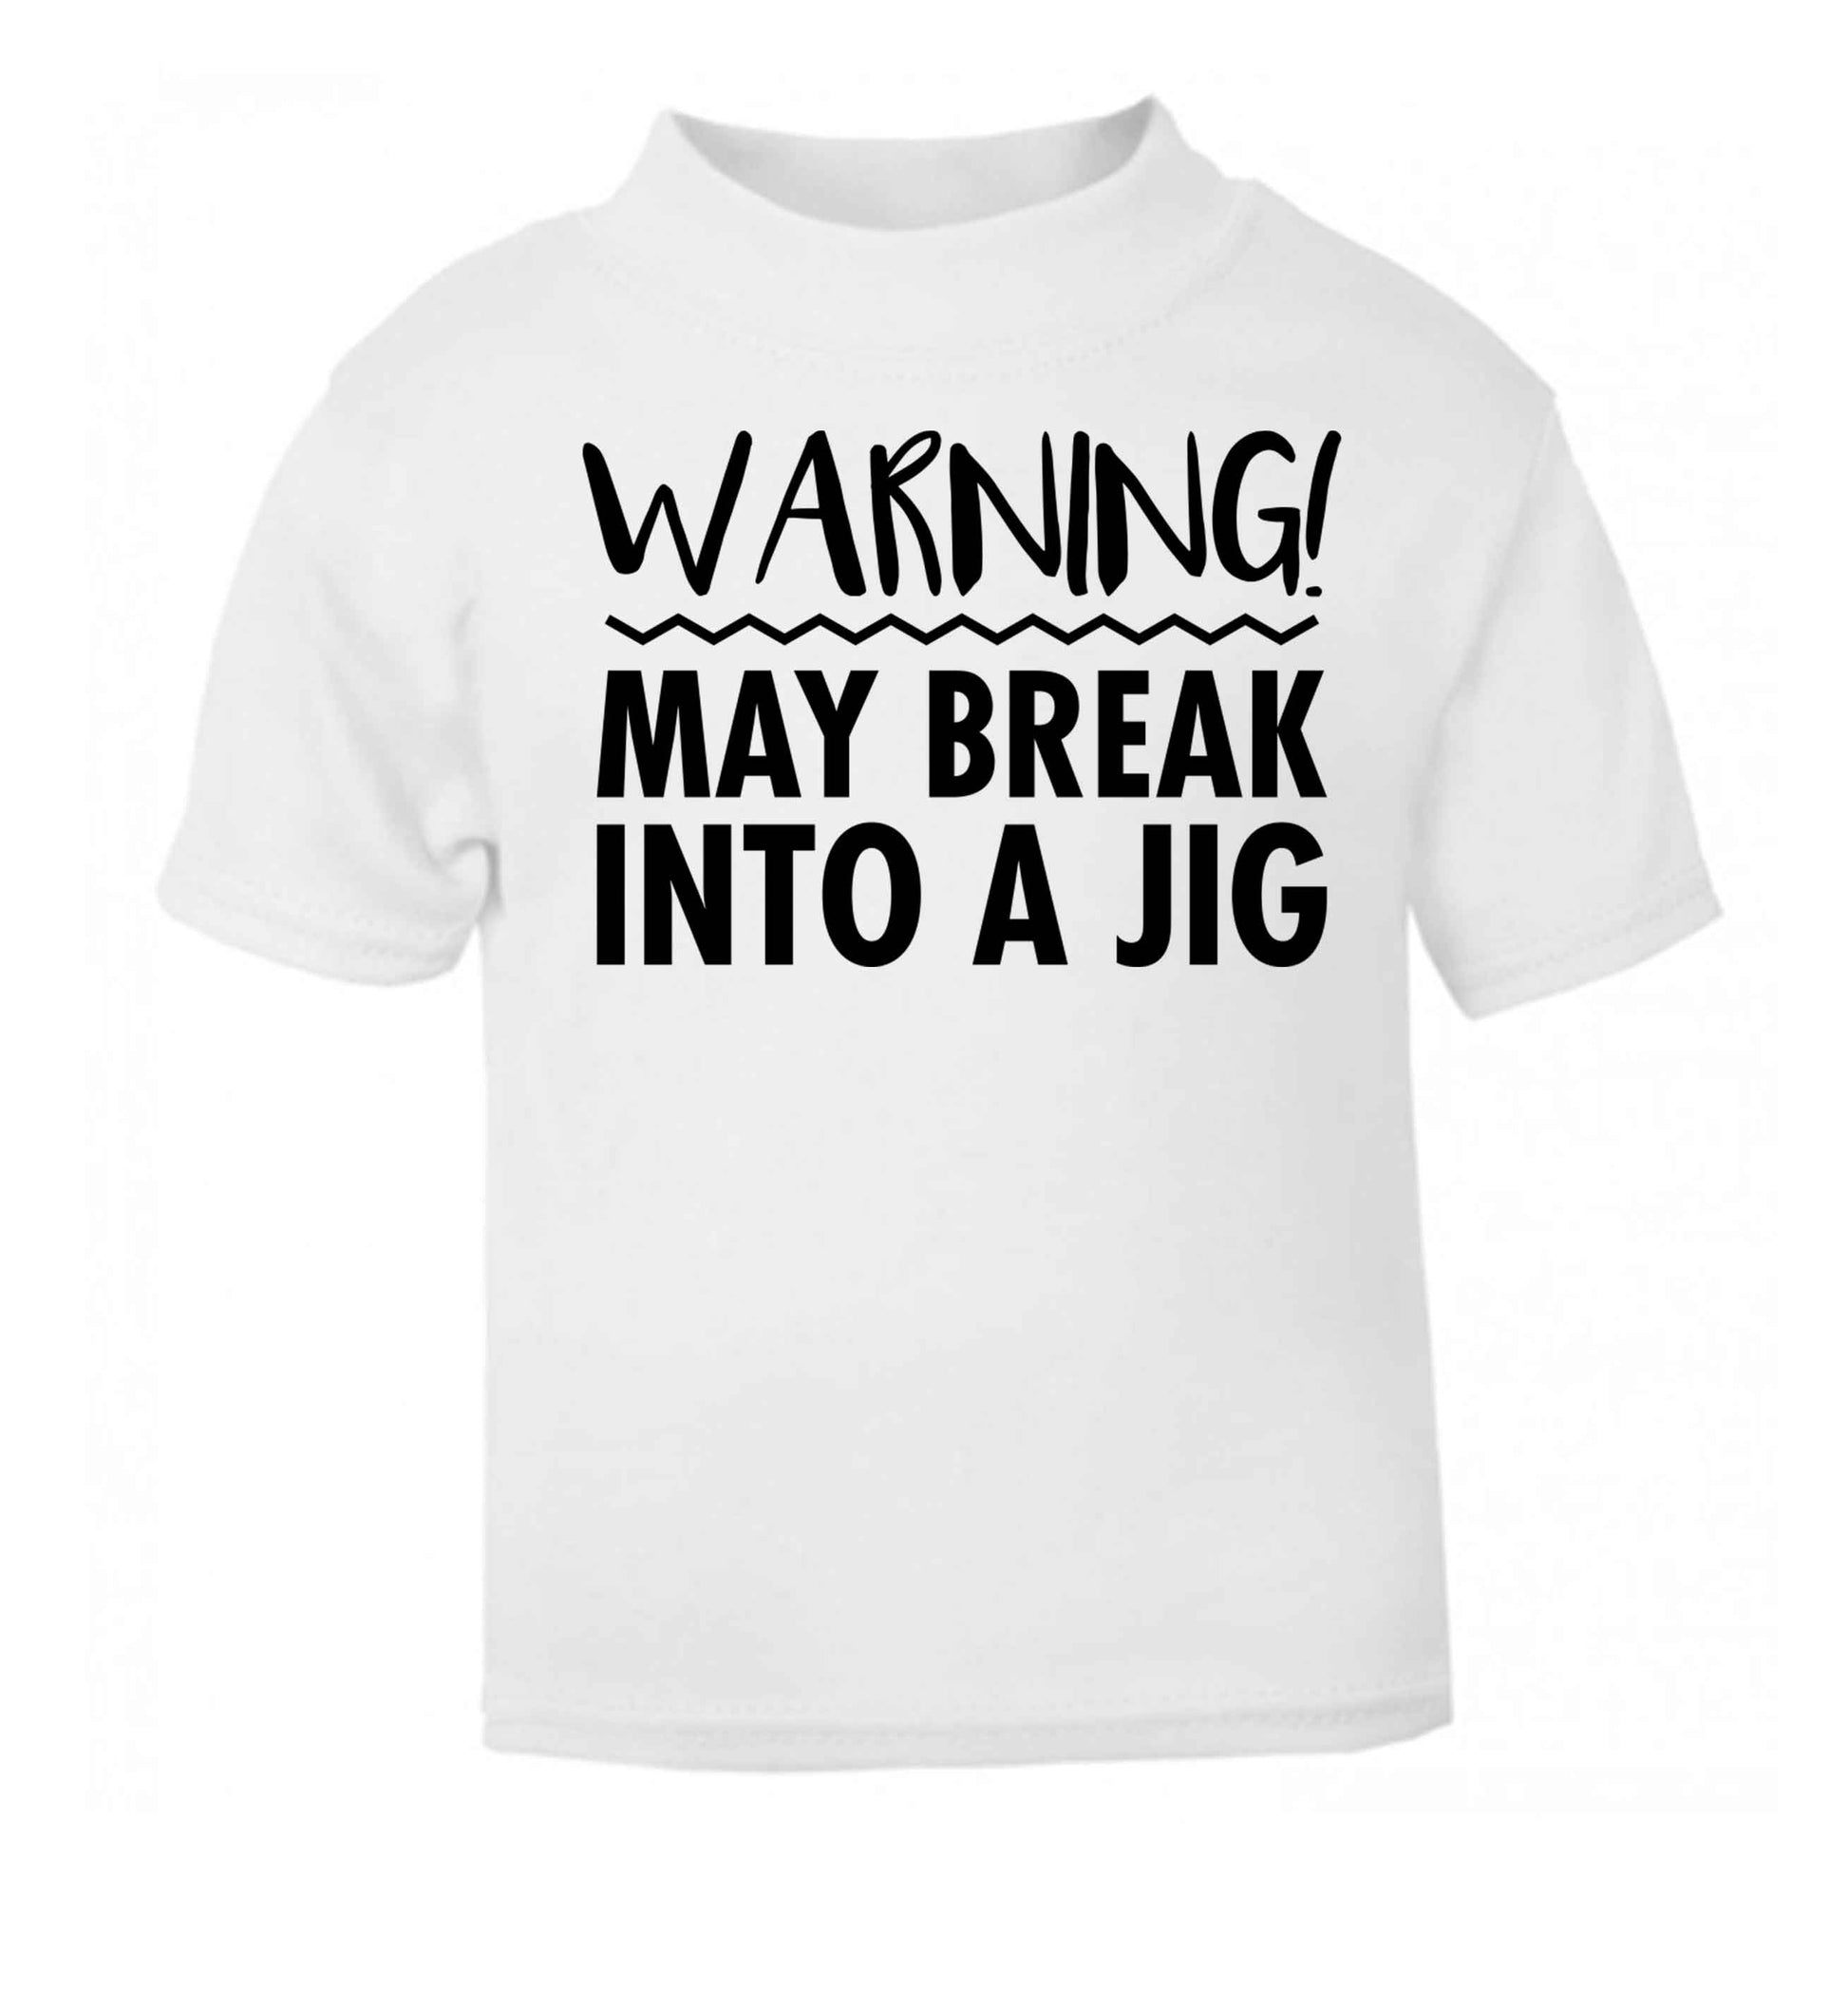 Warning may break into a jig white baby toddler Tshirt 2 Years